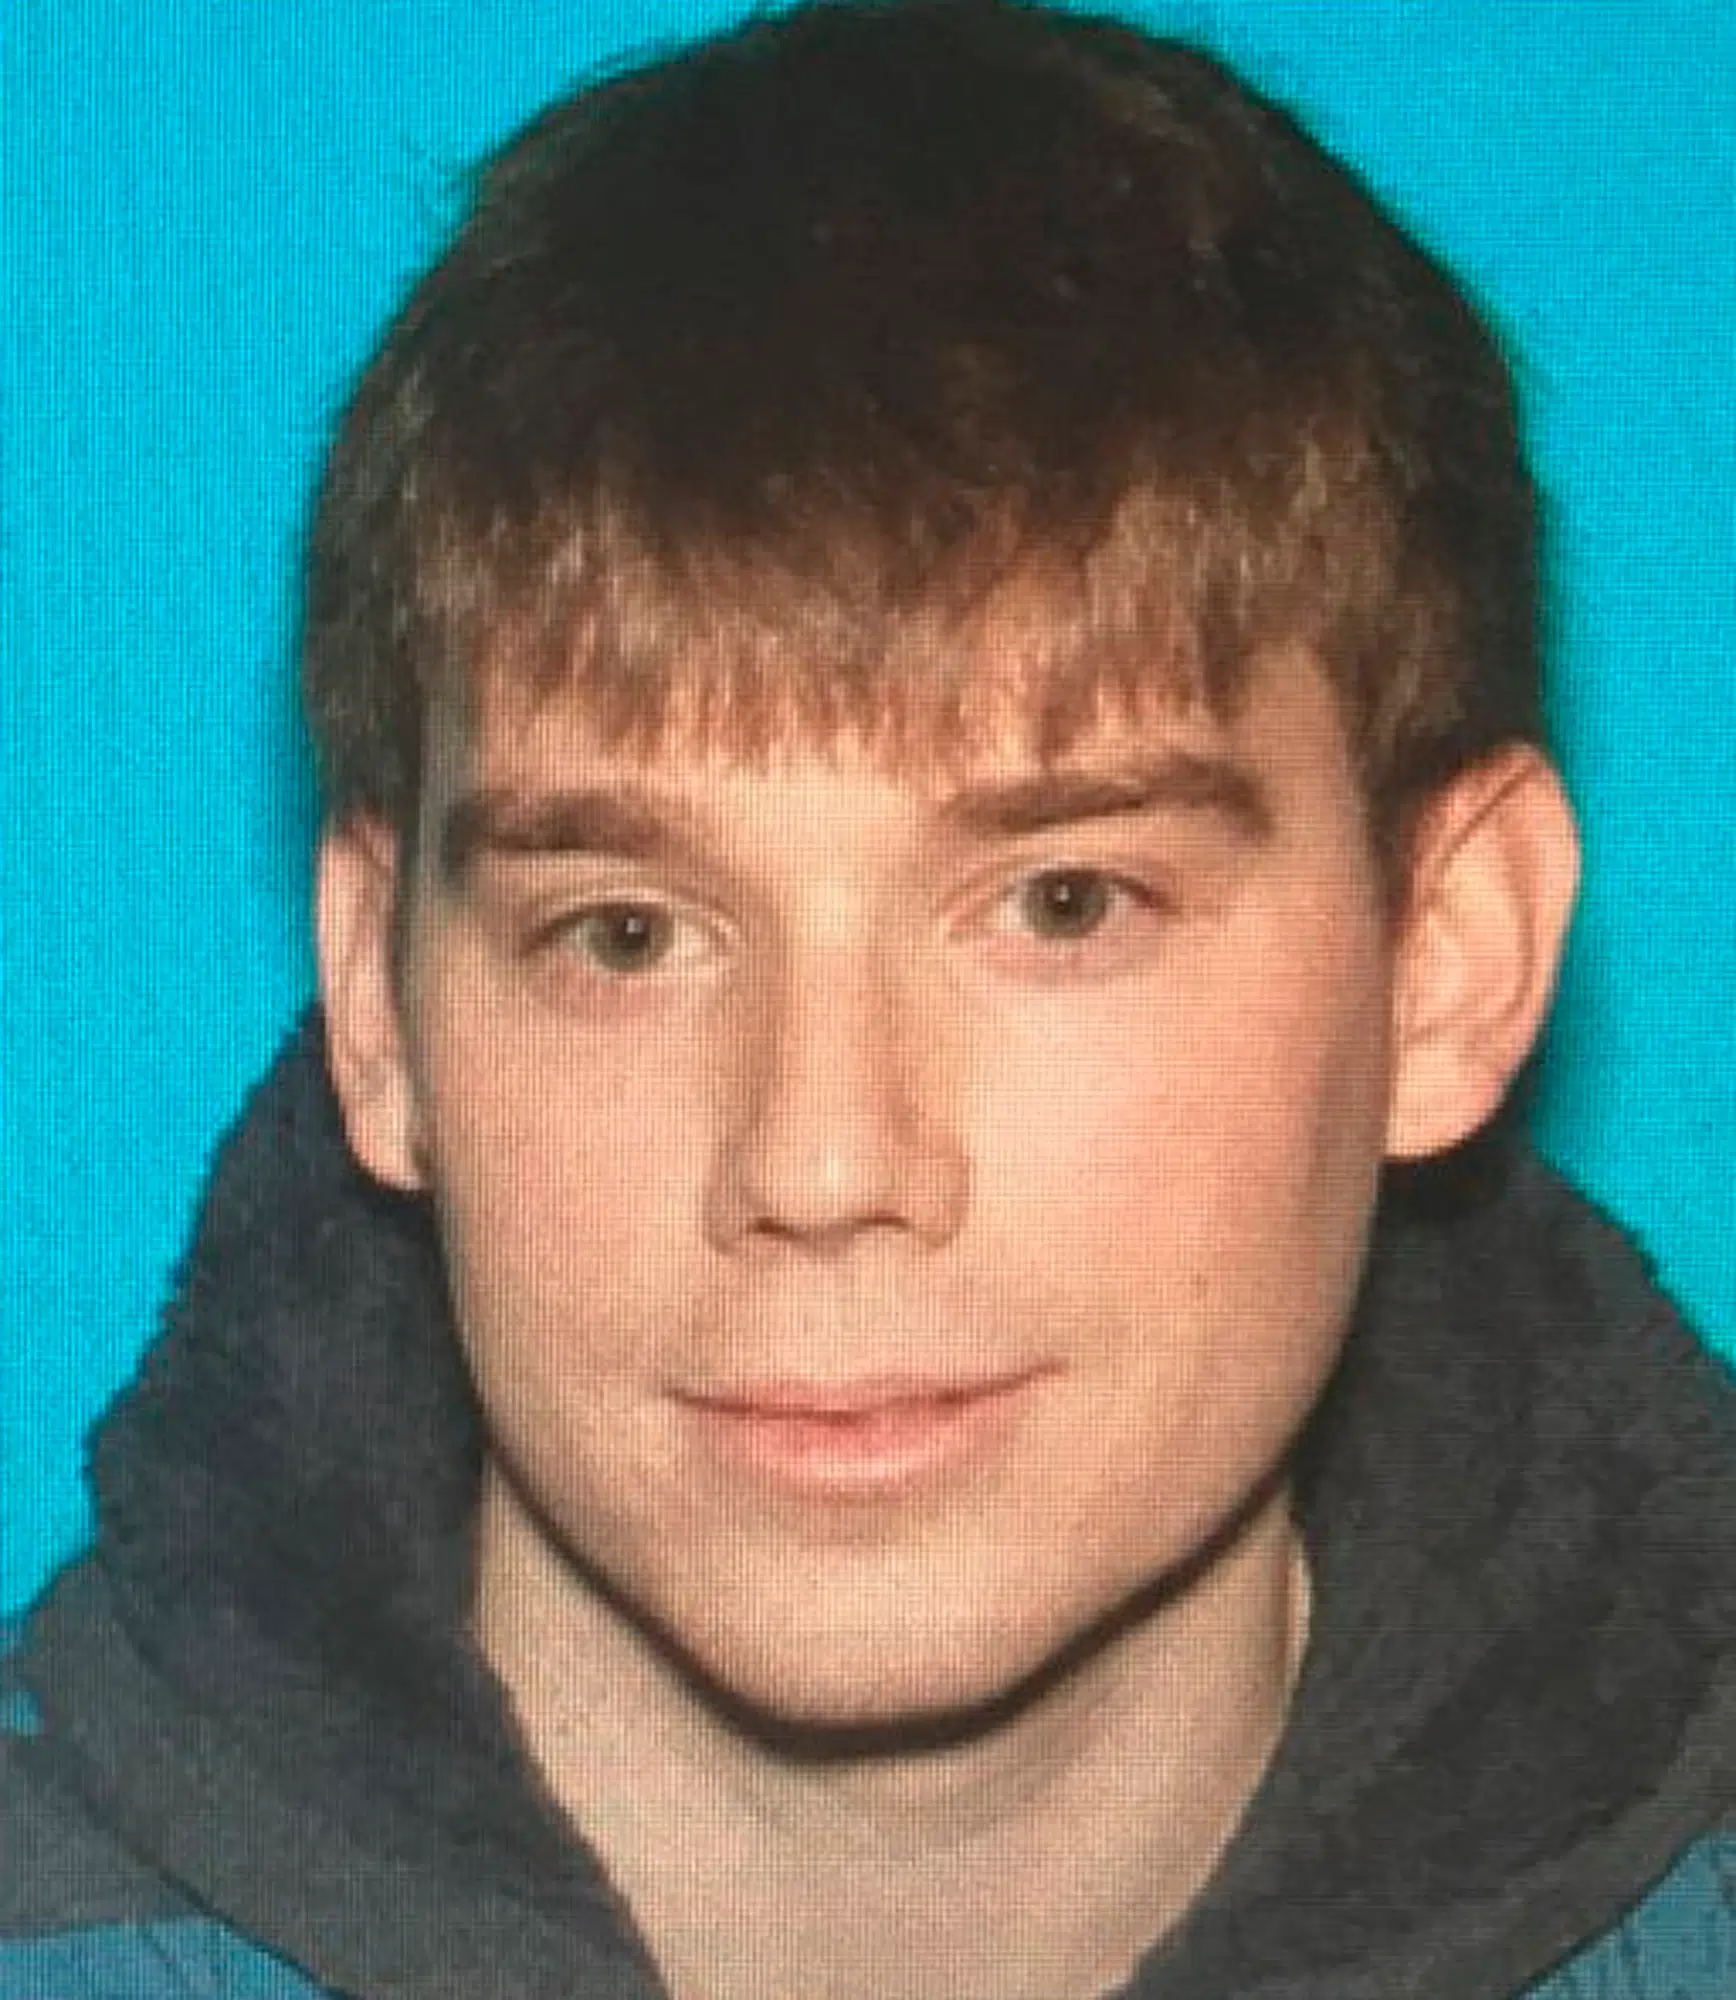 Illinois Man Wanted In Connection To Deadly Tennessee Shooting